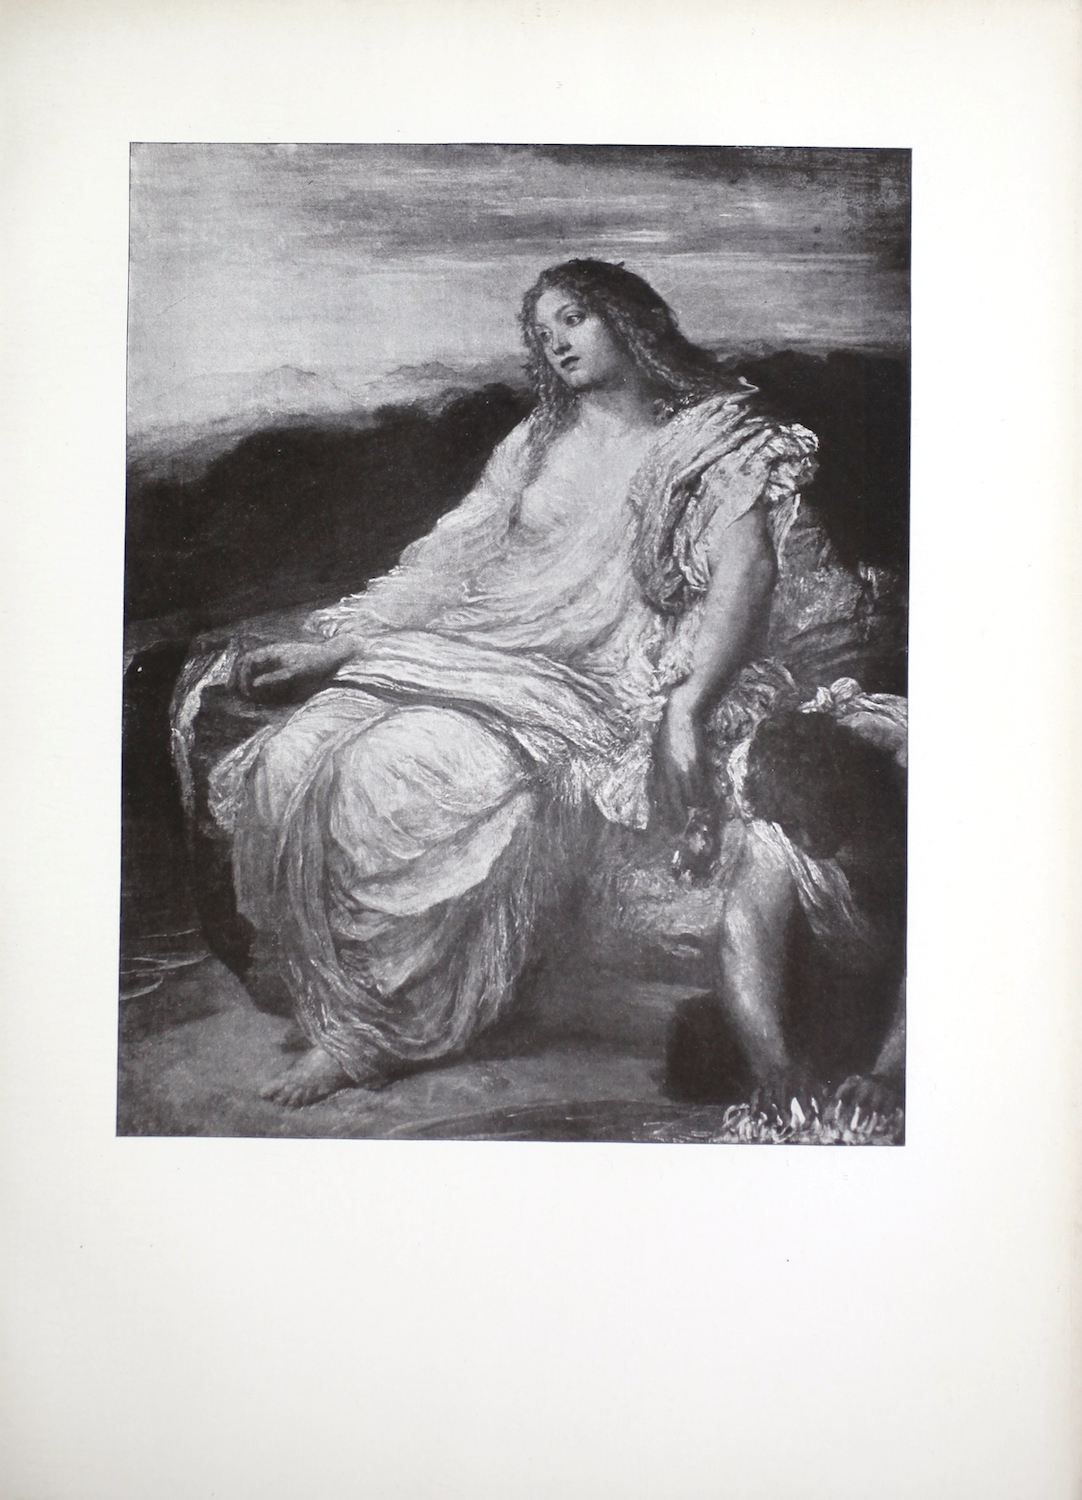 The halftone image depicts the mythological figure, Ariadne, looking out over the landscape that surrounds her. Ariadne sits in three-quarter profile facing left, on what appears to be a large rock. Her hair hangs loose, down to her shoulders. Her full-length dress is a series of loose robes that hang from her shoulders. Her left arm is exposed with the robe bundled up on her left shoulder. Her left hand hangs down by her side. Her right arm is covered by her robes and her right-hand rests on top of the rock. Her left foot is bare and exposed from underneath the hem of her robes. The ground appears to be a stone altar because it is smooth, and a male servant is depicted to left of Ariadne in the lower corner on his hands and knees scrubbing its surface. Only his upper body is visible. He gazes down and uses both hands to scrub the floor. Behind the two figures, a distant landscape is visible beneath Ariadne, suggesting that she is sitting on top of a mountain. Additional mountains are visible in the background rising to the height of Ariadne’s eyes. In front of the mountains, a dark tree line is visible rising to Ariadne’s shoulders. Above the trees and mountains, a cloudy sky is depicted.